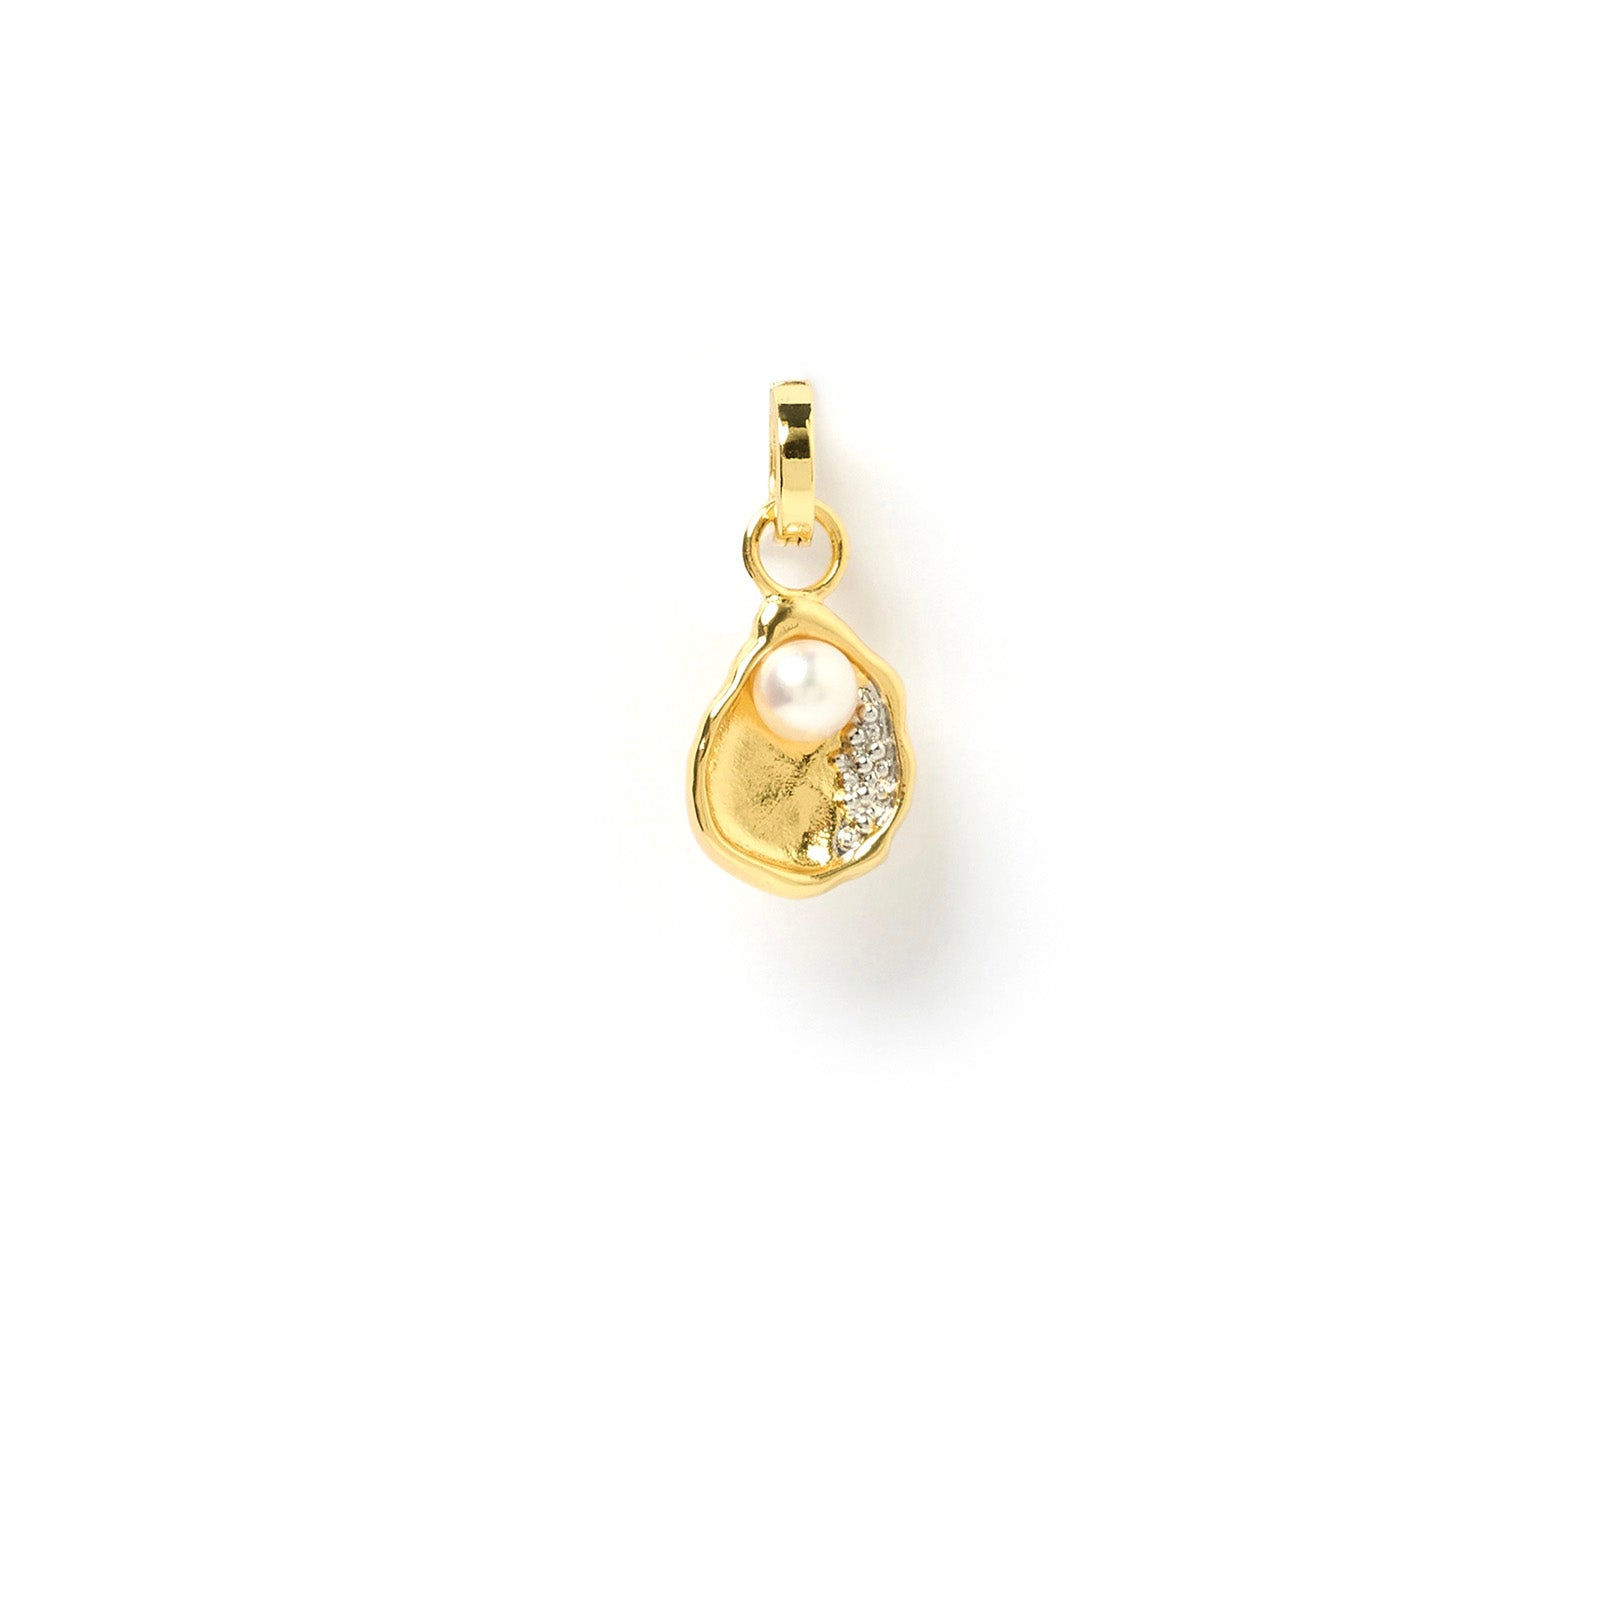 Arms Of Eve Ursula gold oyster charm, a stunning gold pendant adorned with lustrous pearl and dazzling diamonds